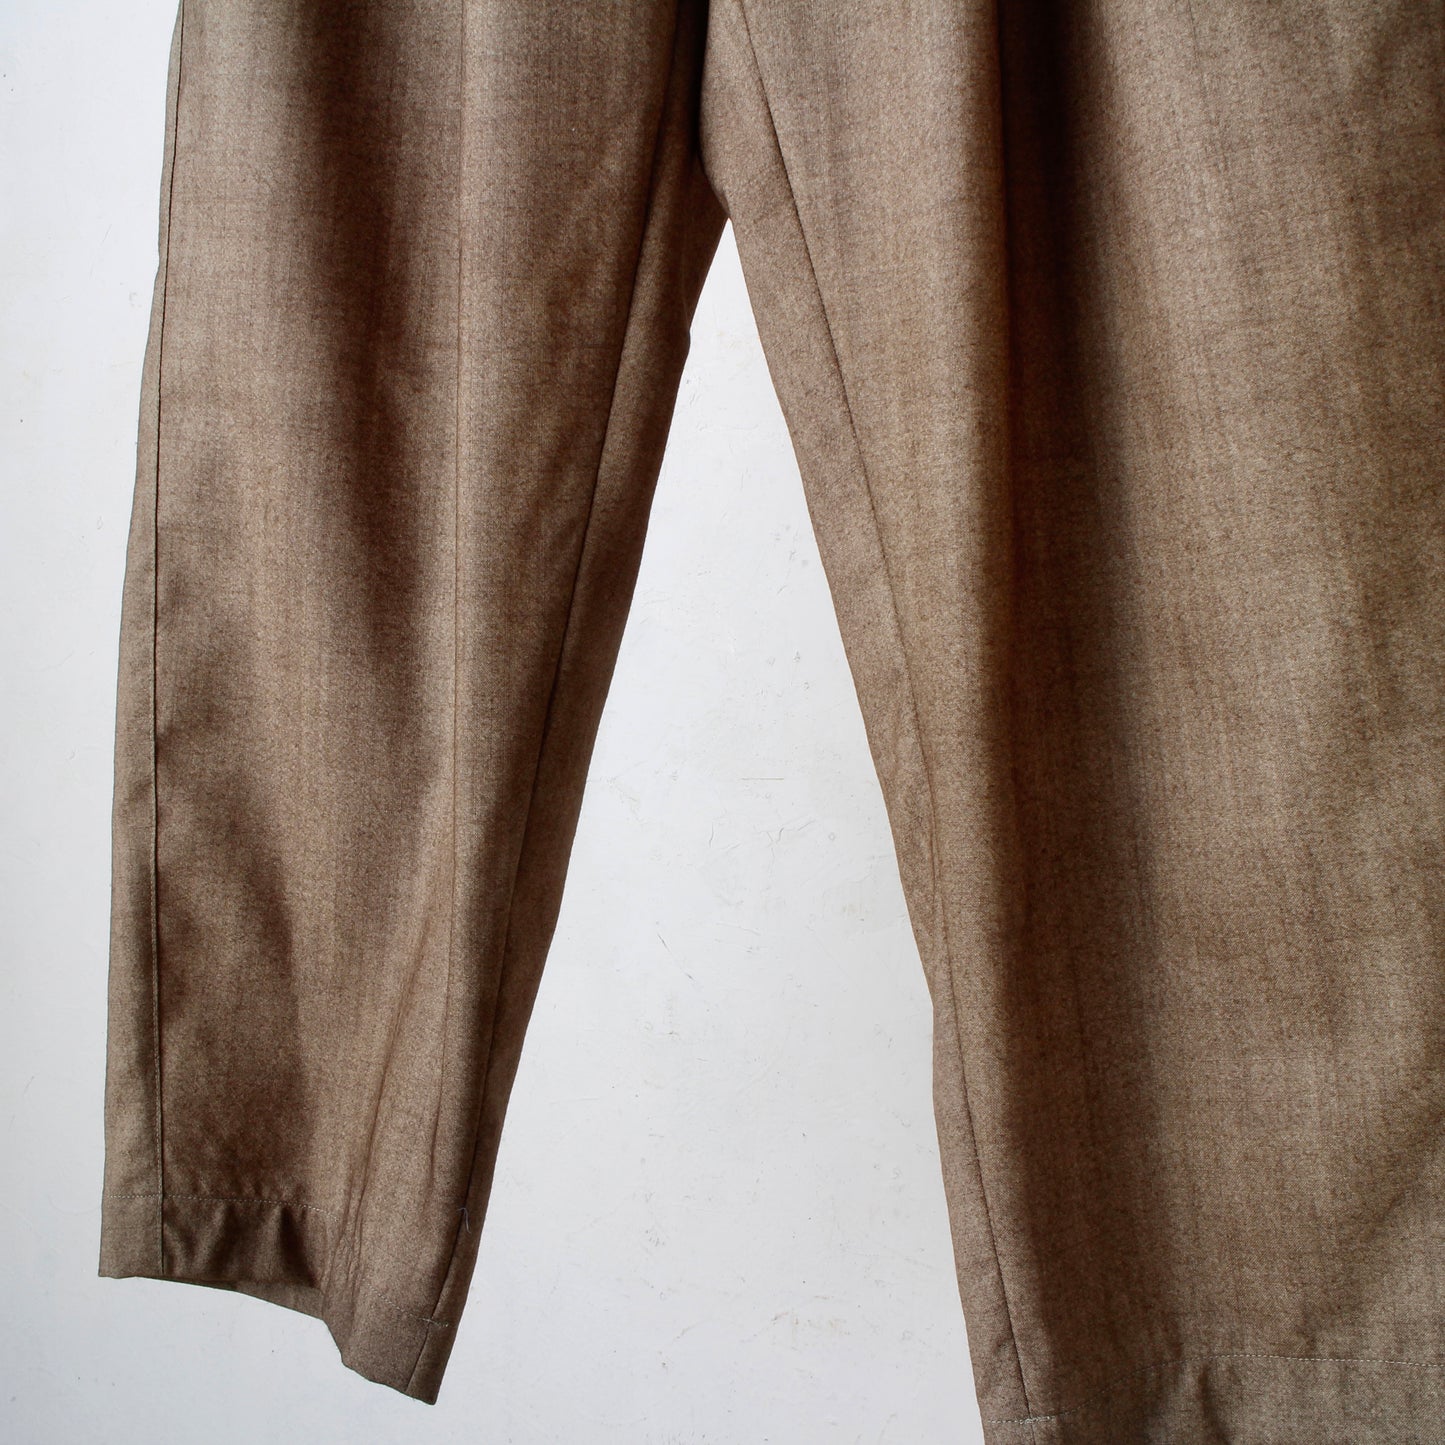 Uneven Dyed Tapered Pants / brown-beige